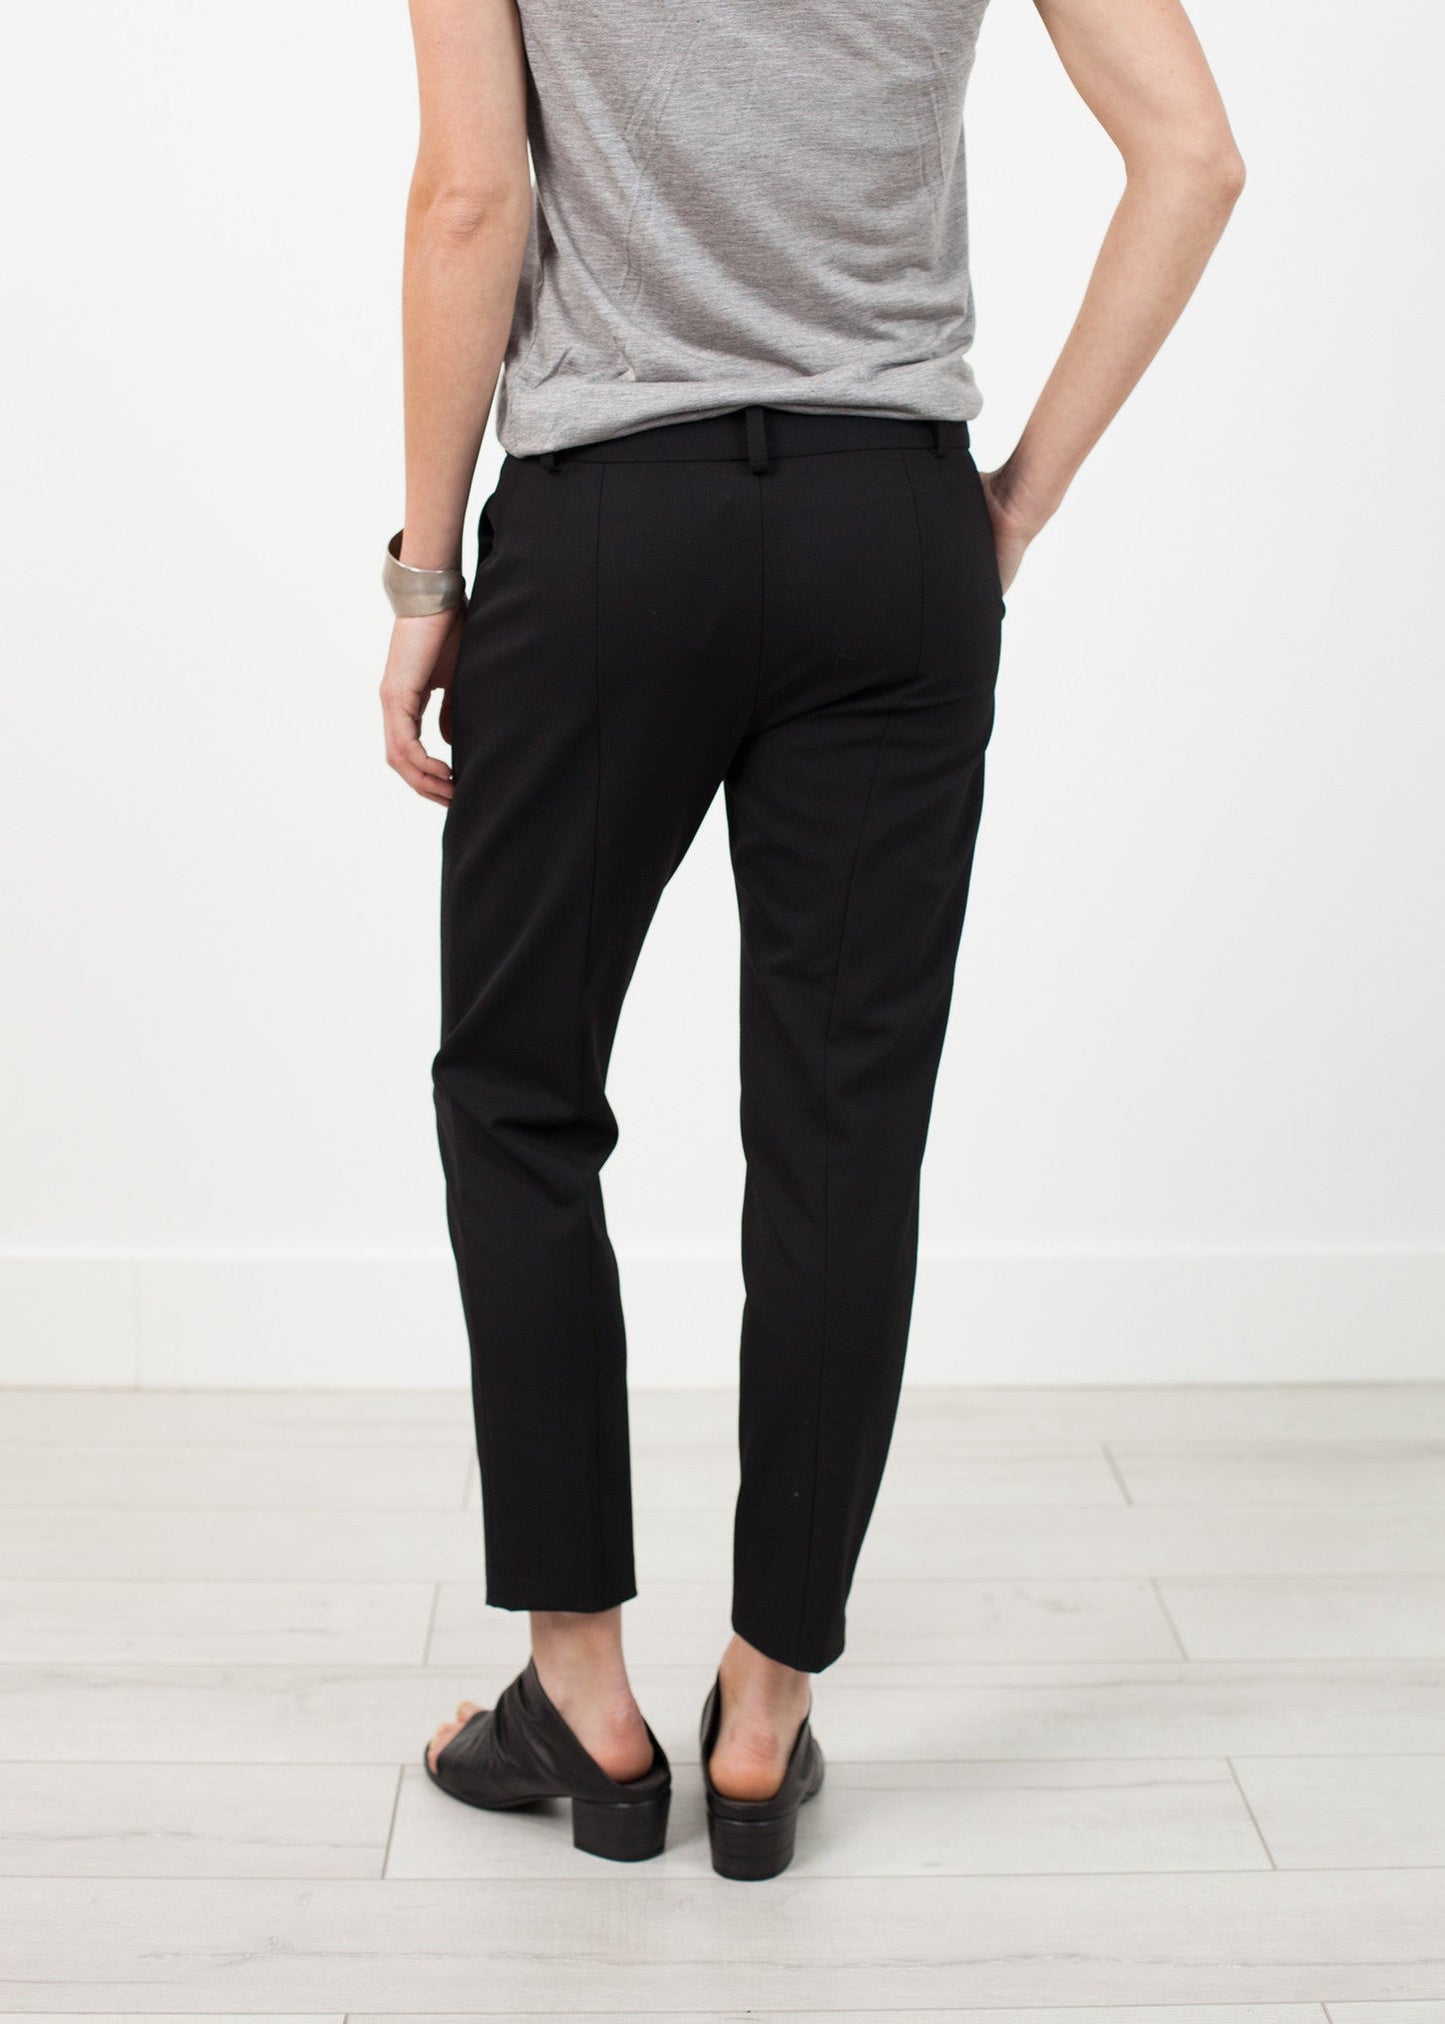 Stretch Fitted Pant in Black